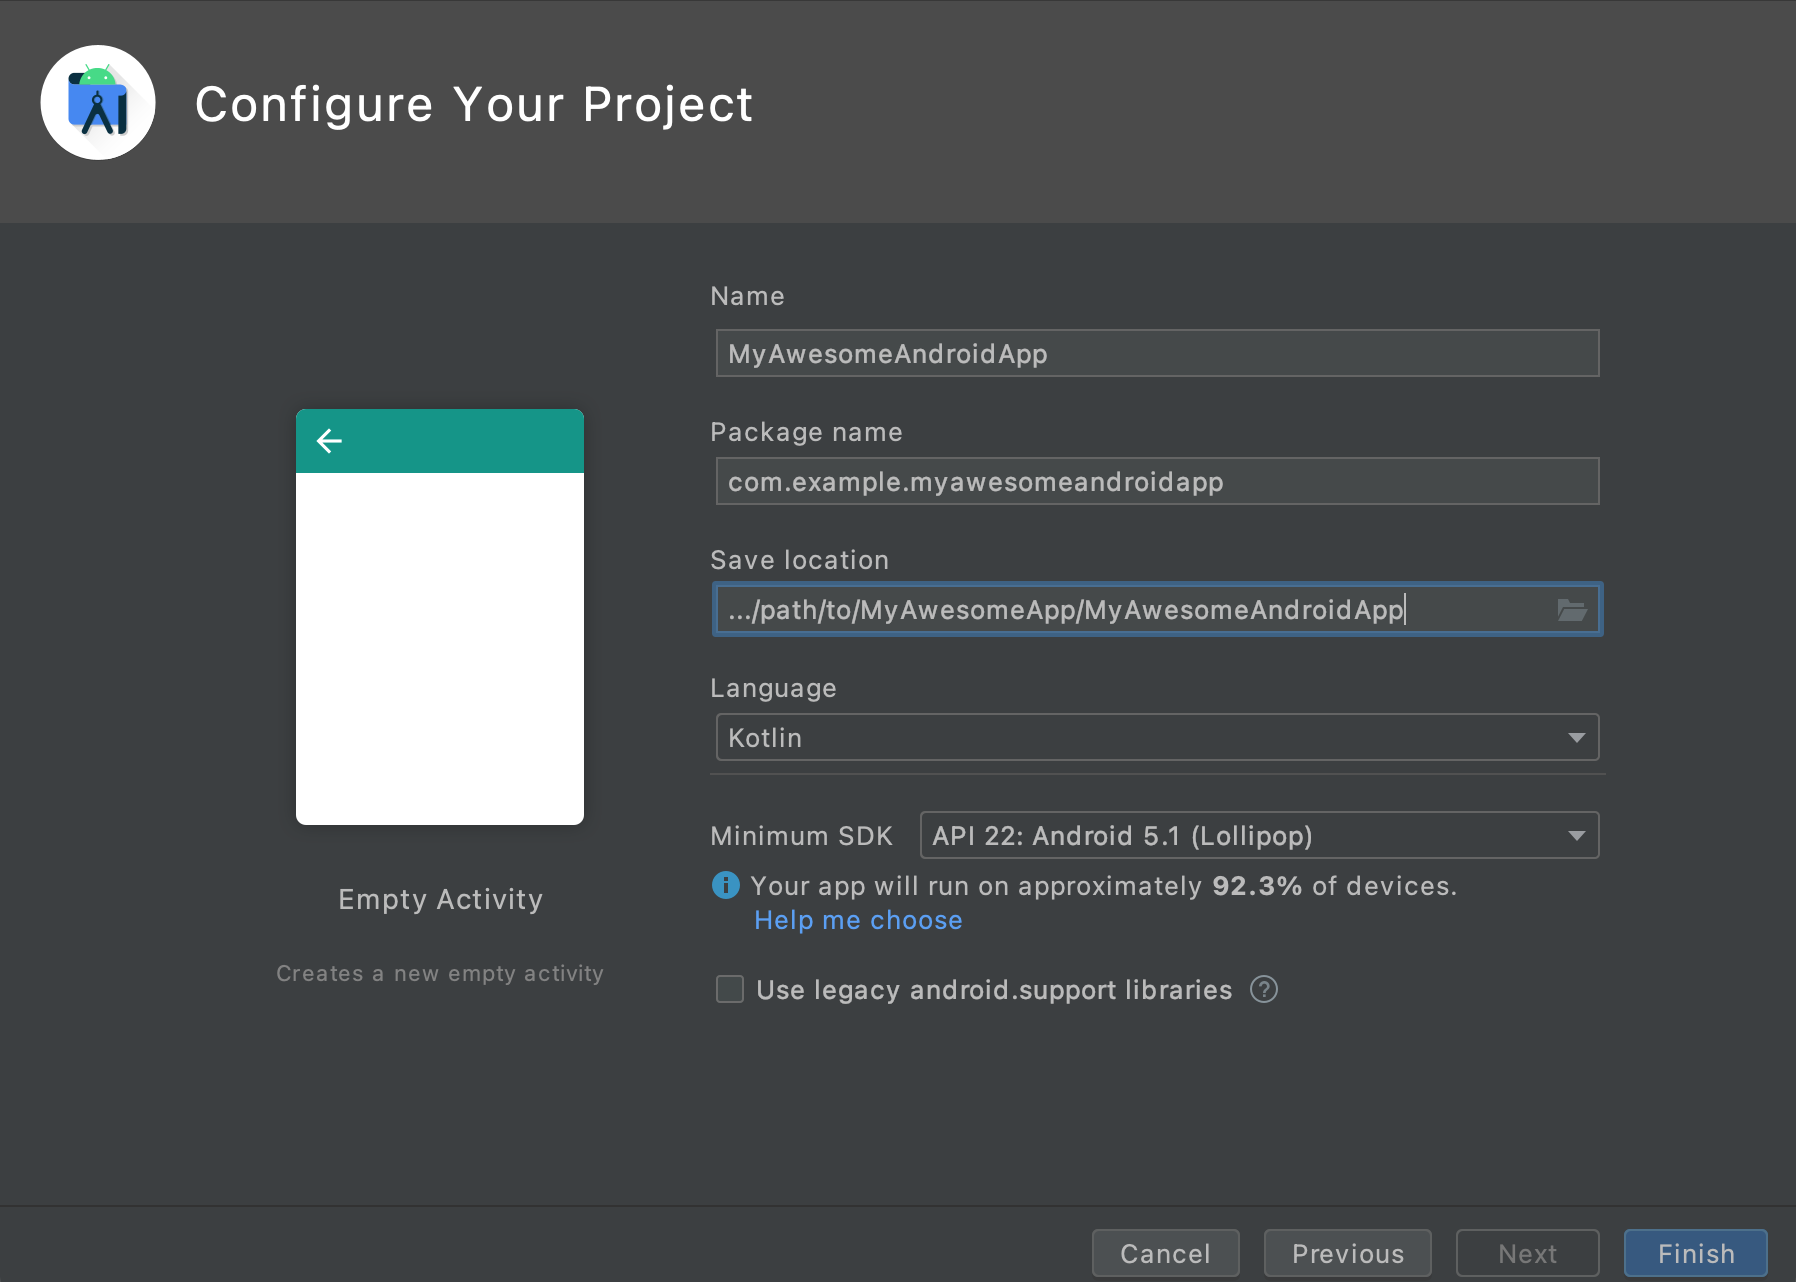 Android Studio's "Configure your project" window